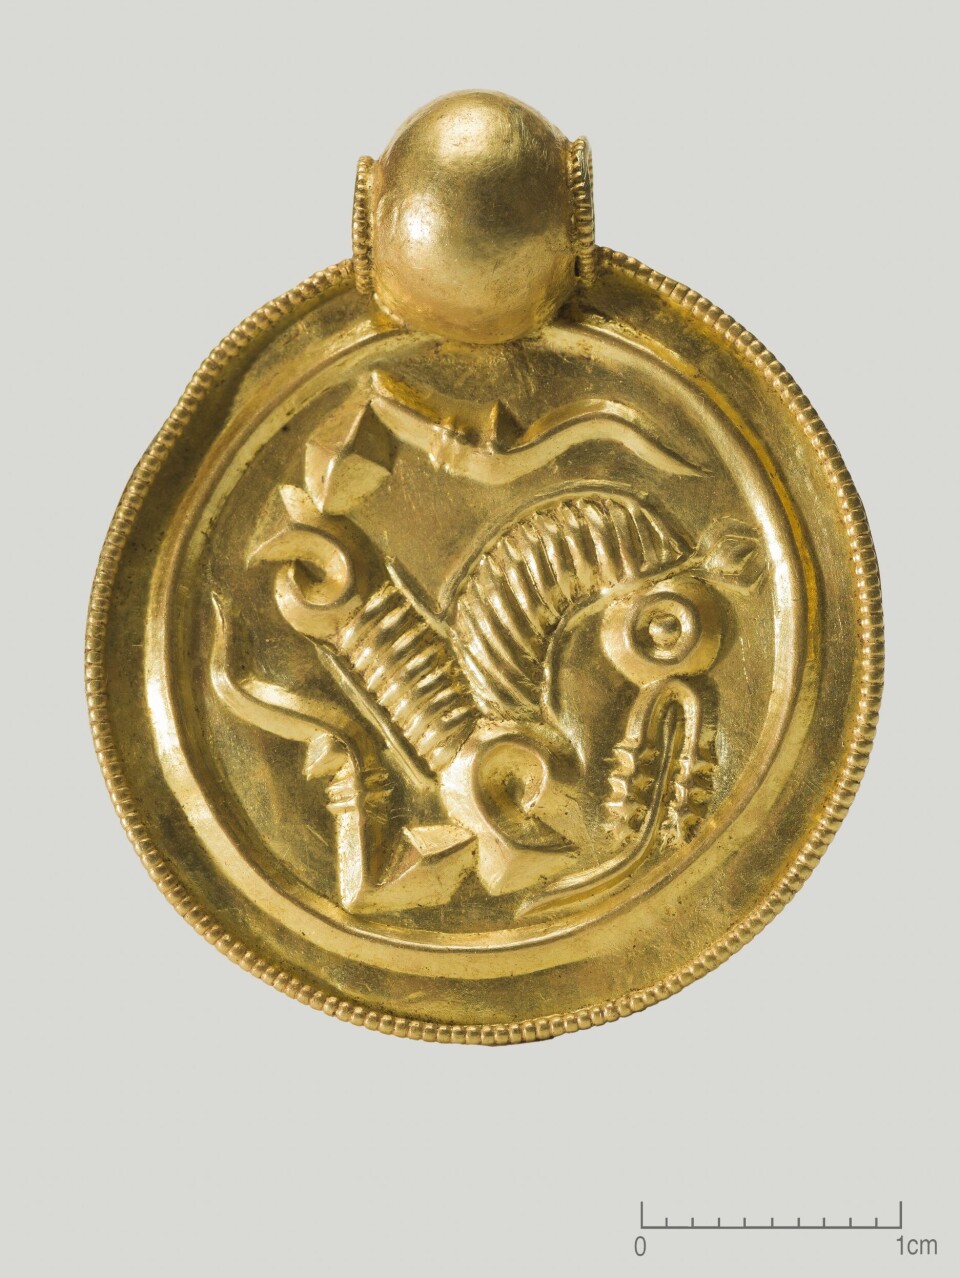 A close-up of one of the bracteates from Rennesøy in Stavanger. This one depicts a horse with its tongue hanging out of its mouth, according to the archaeologists. It is around two centimeters wide.